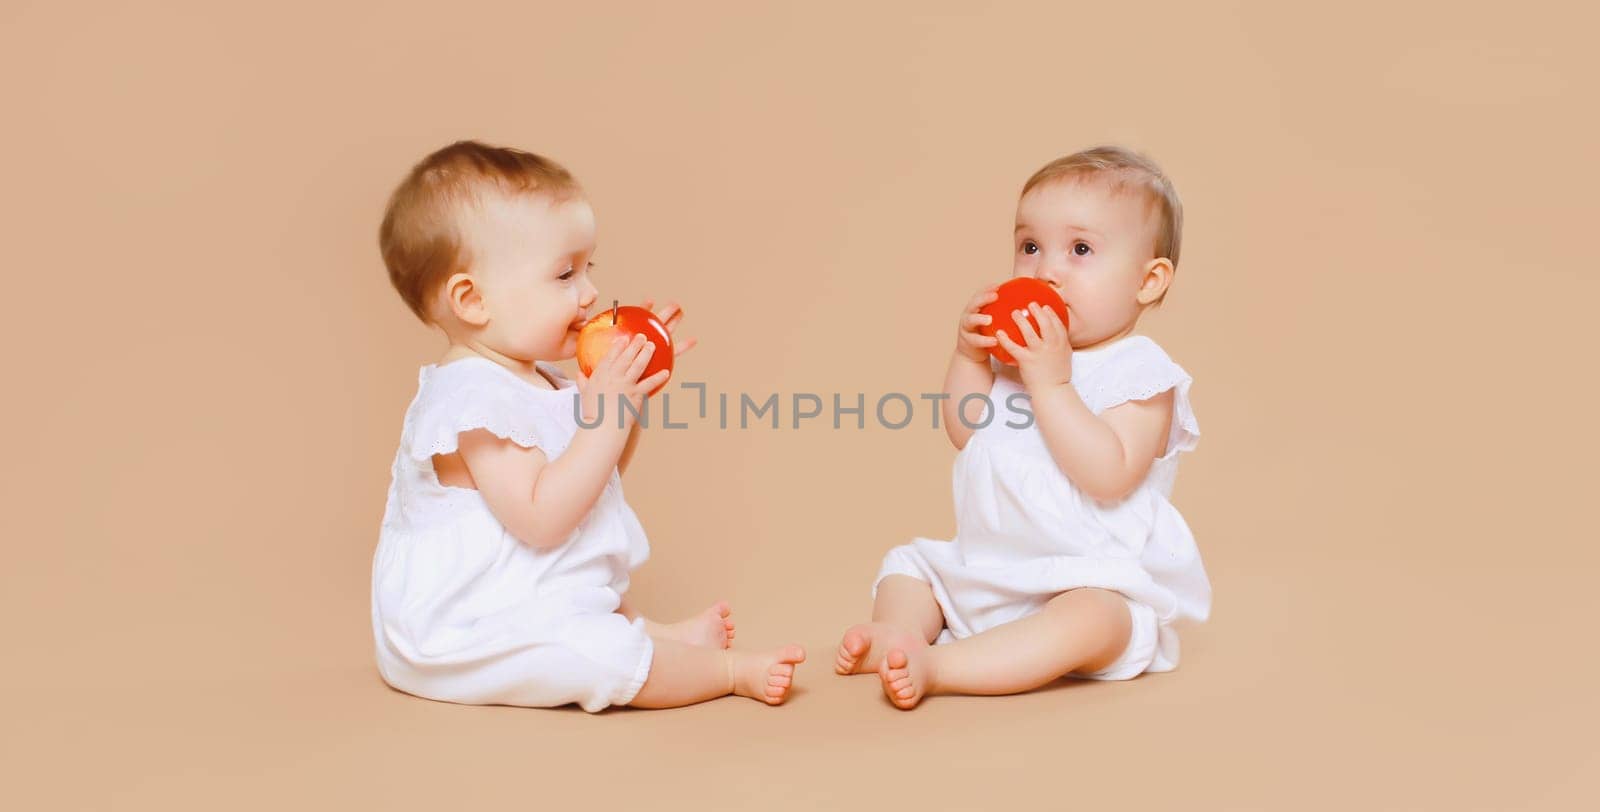 Two twin babies eating red apple fruit together sitting on the floor on brown studio background